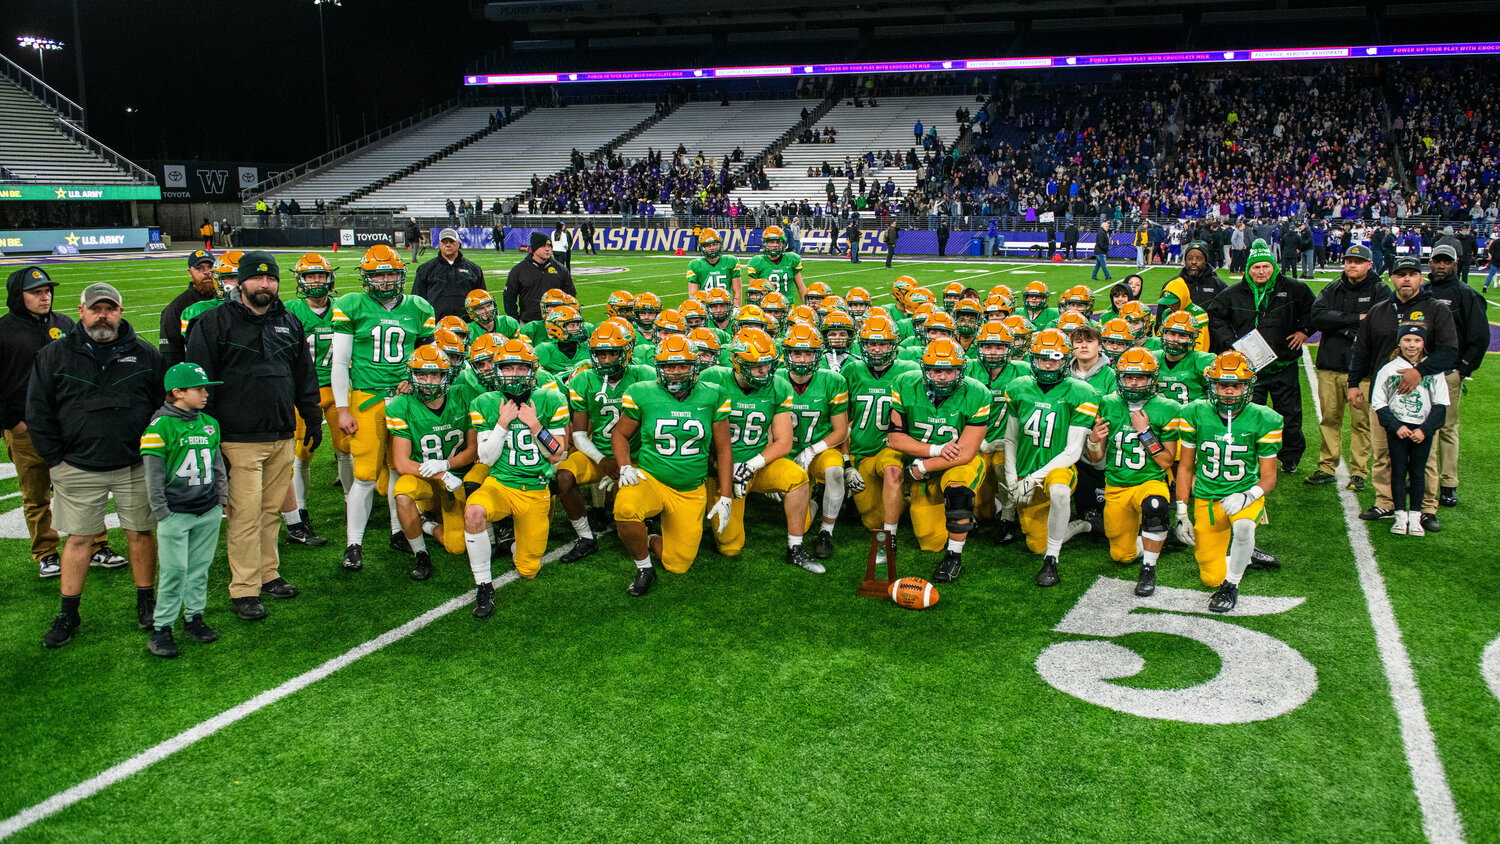 Tumwater poses for a photo with the second place trophy after a loss to Anacortes in the 2A State Championship game on Saturday, Dec. 2 at Husky Stadium.